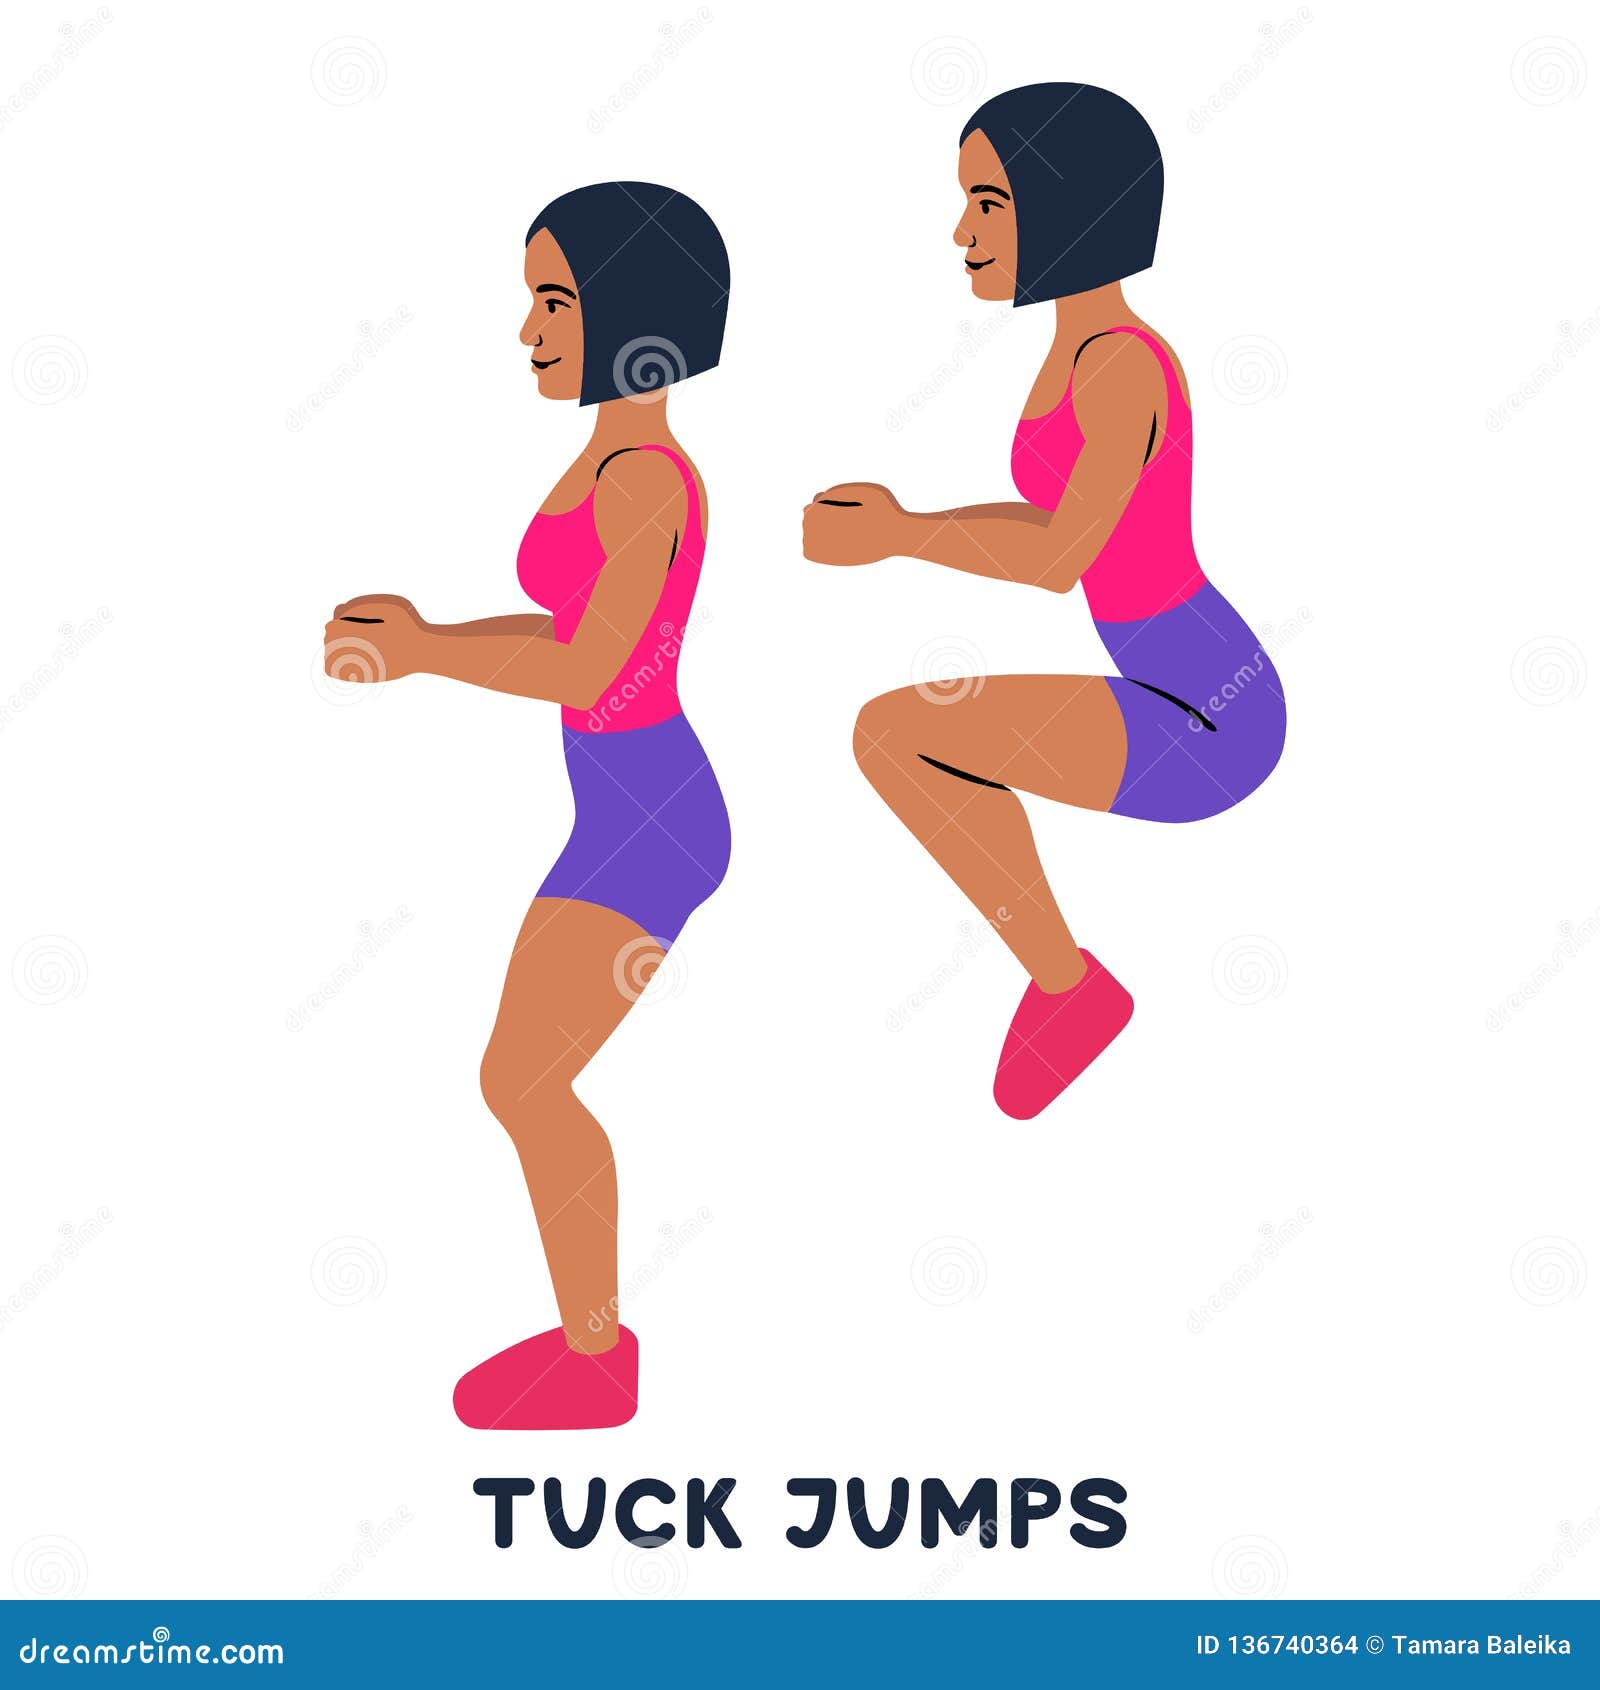 tuck jumps. sport exersice. silhouettes of woman doing exercise. workout, training